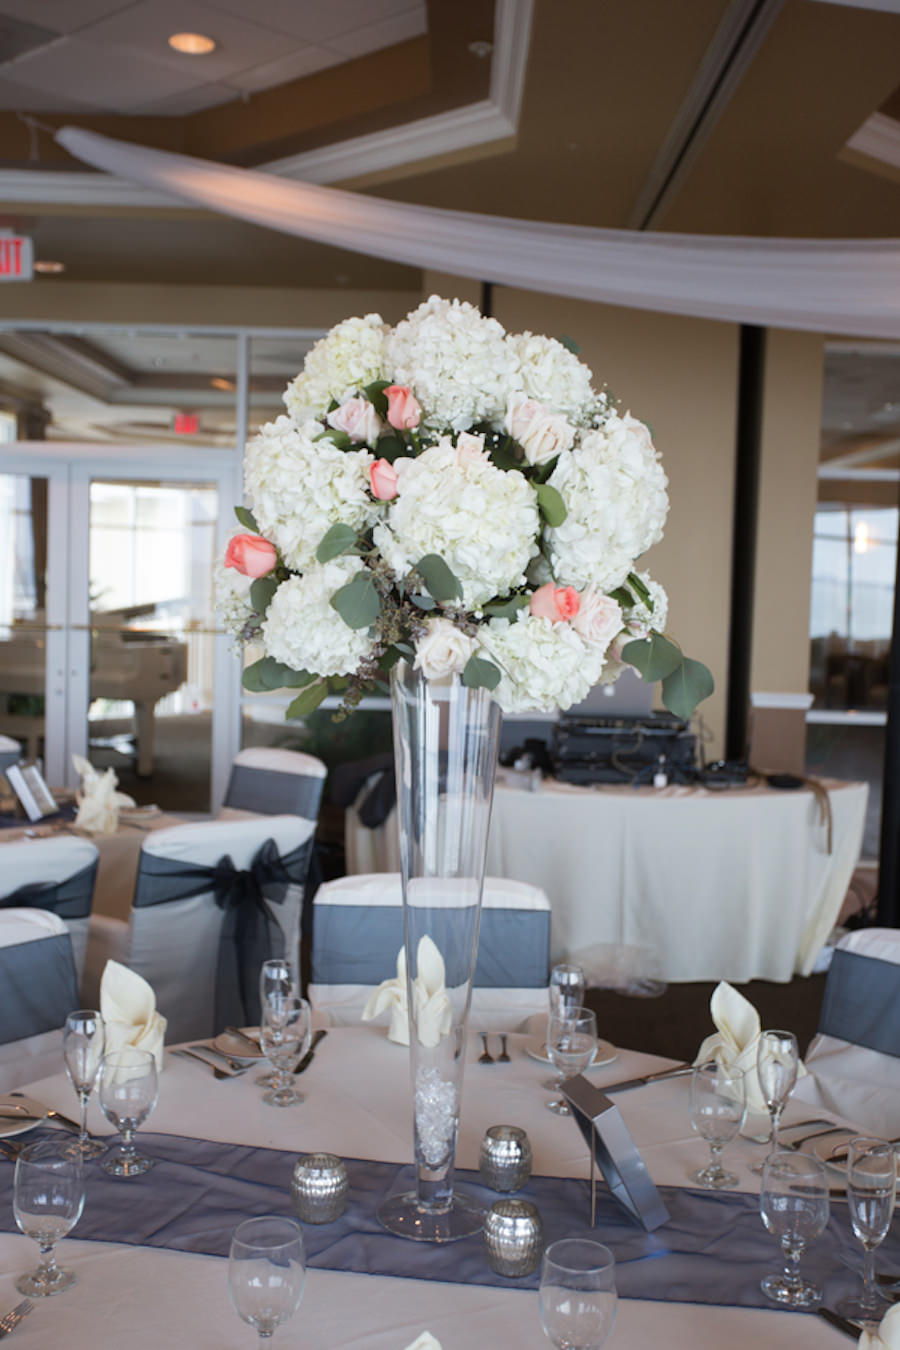 Wedding Reception Décor with Tall White and Coral Hydrangea and Rose Centerpieces on Silver Table Runners | St. Petersburg Wedding Florist Iza’s Flowers